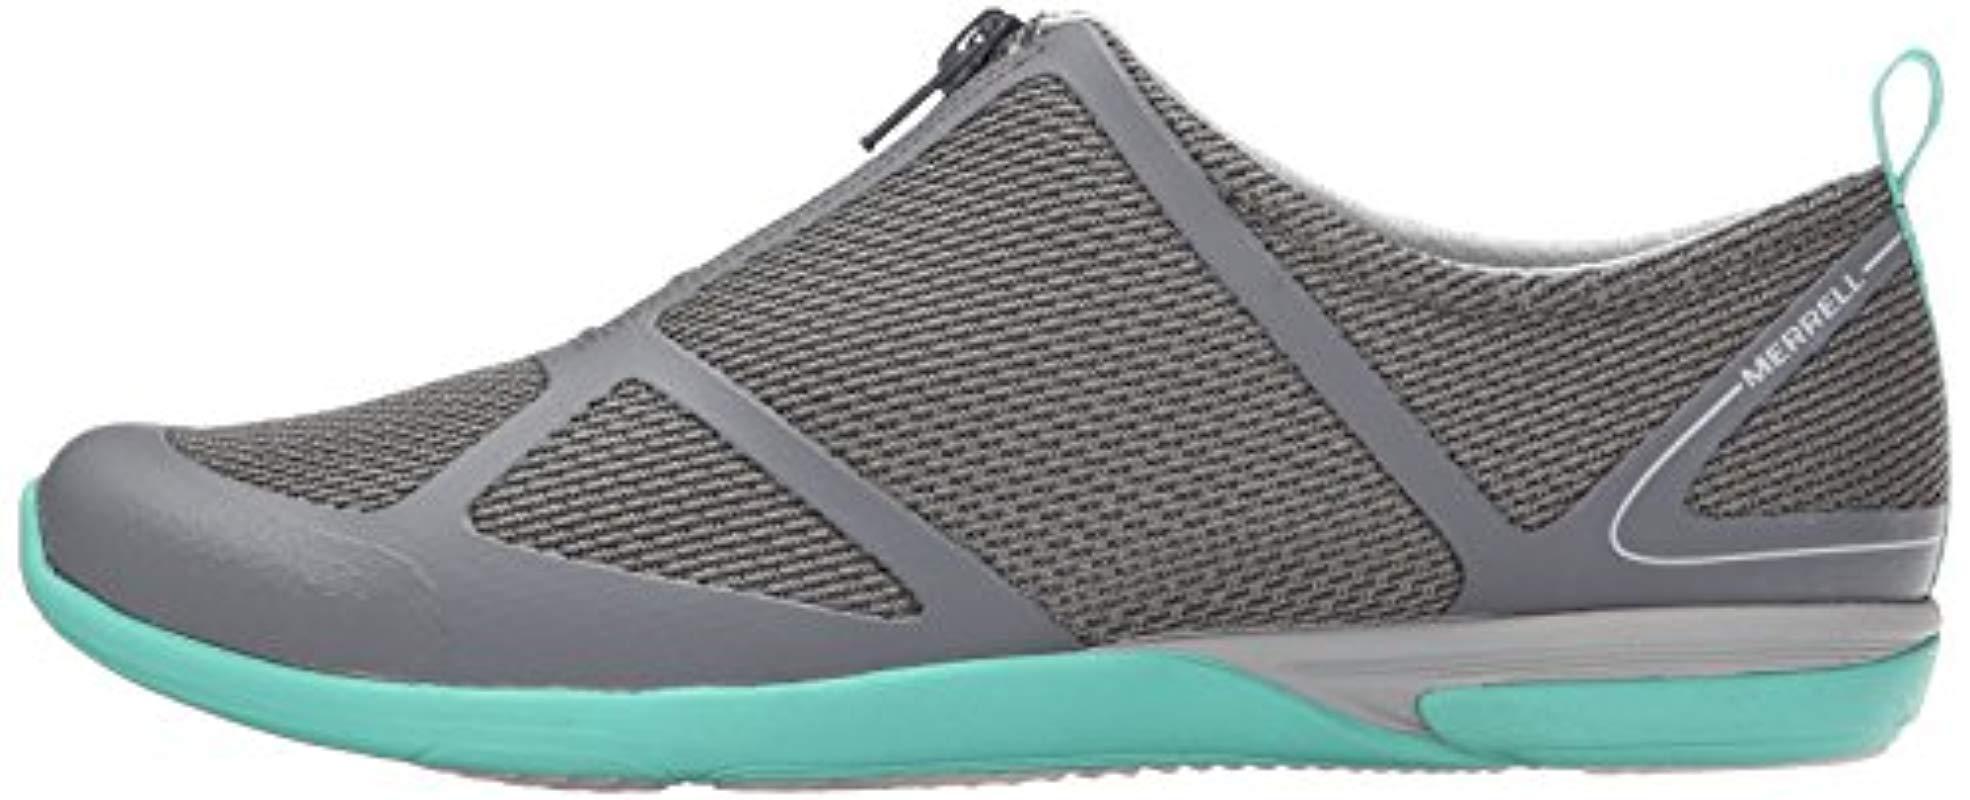 Merrell Ceylon Sport Zip Athletic Shoes, Lightweight And Comfortable In  Breathable Mesh Upper And Zip-up Closure | Lyst